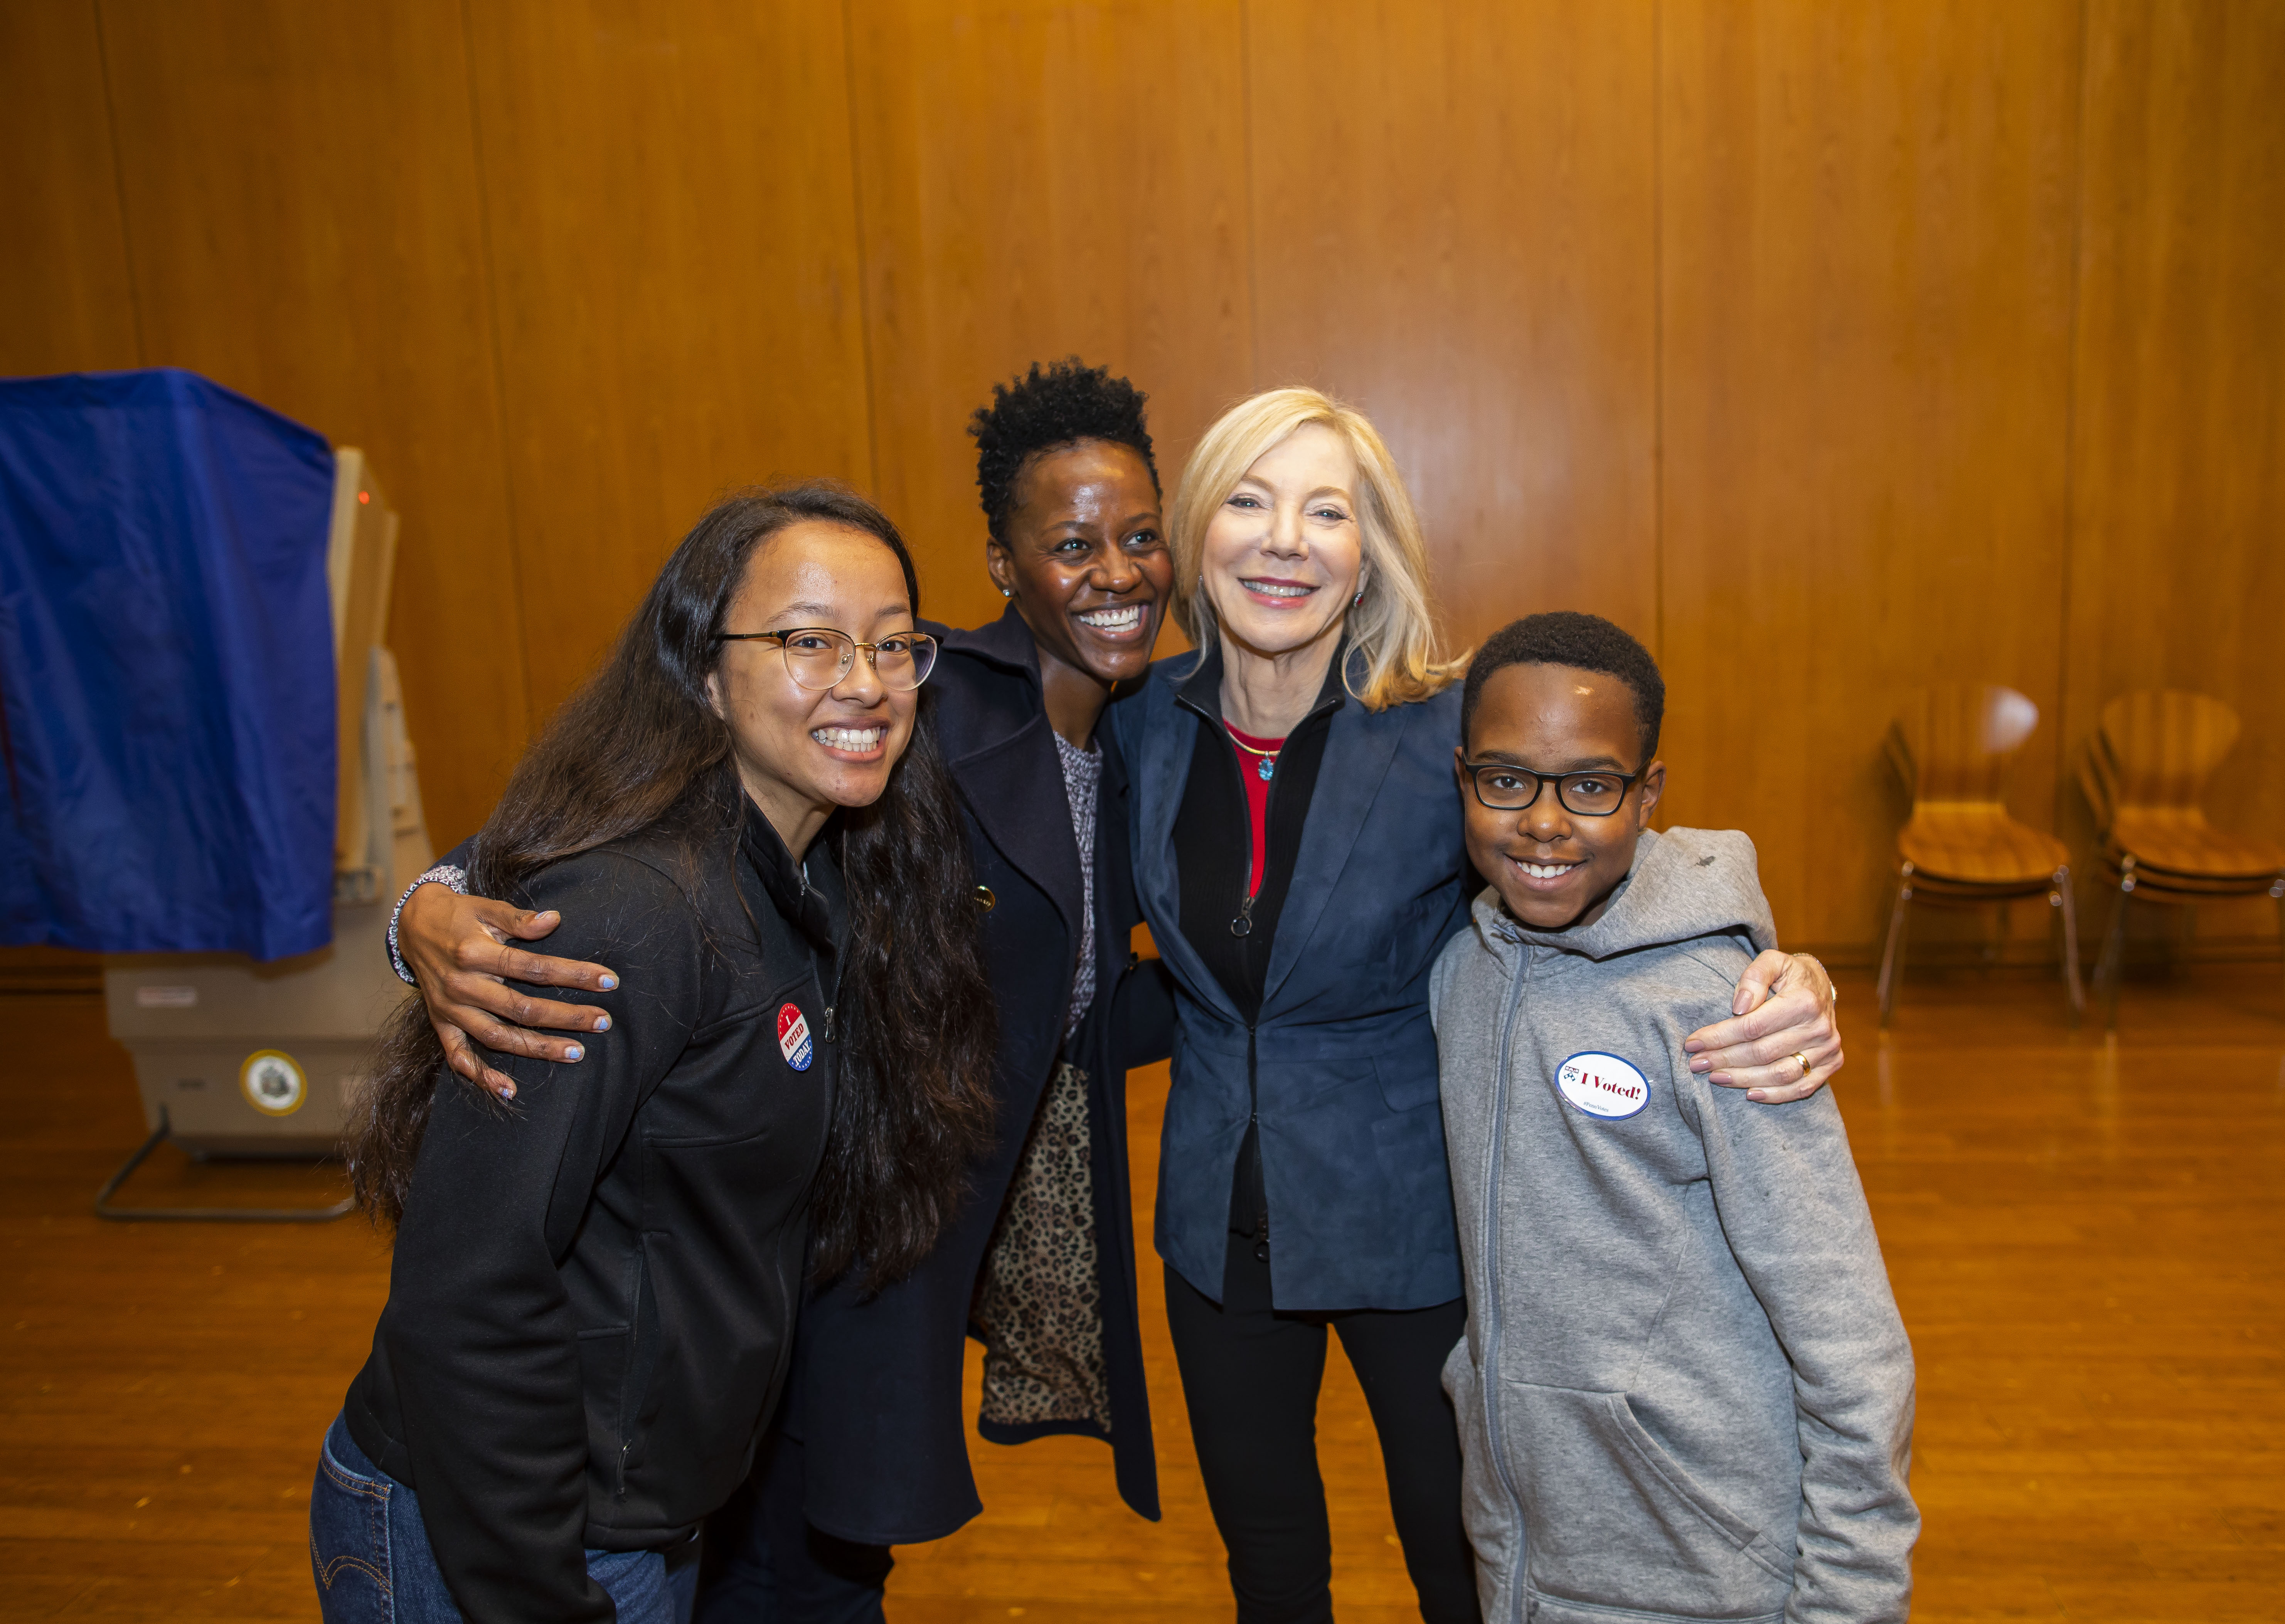 Dr. Gutmann poses for the camera with voters and a young boy at Vance Hall